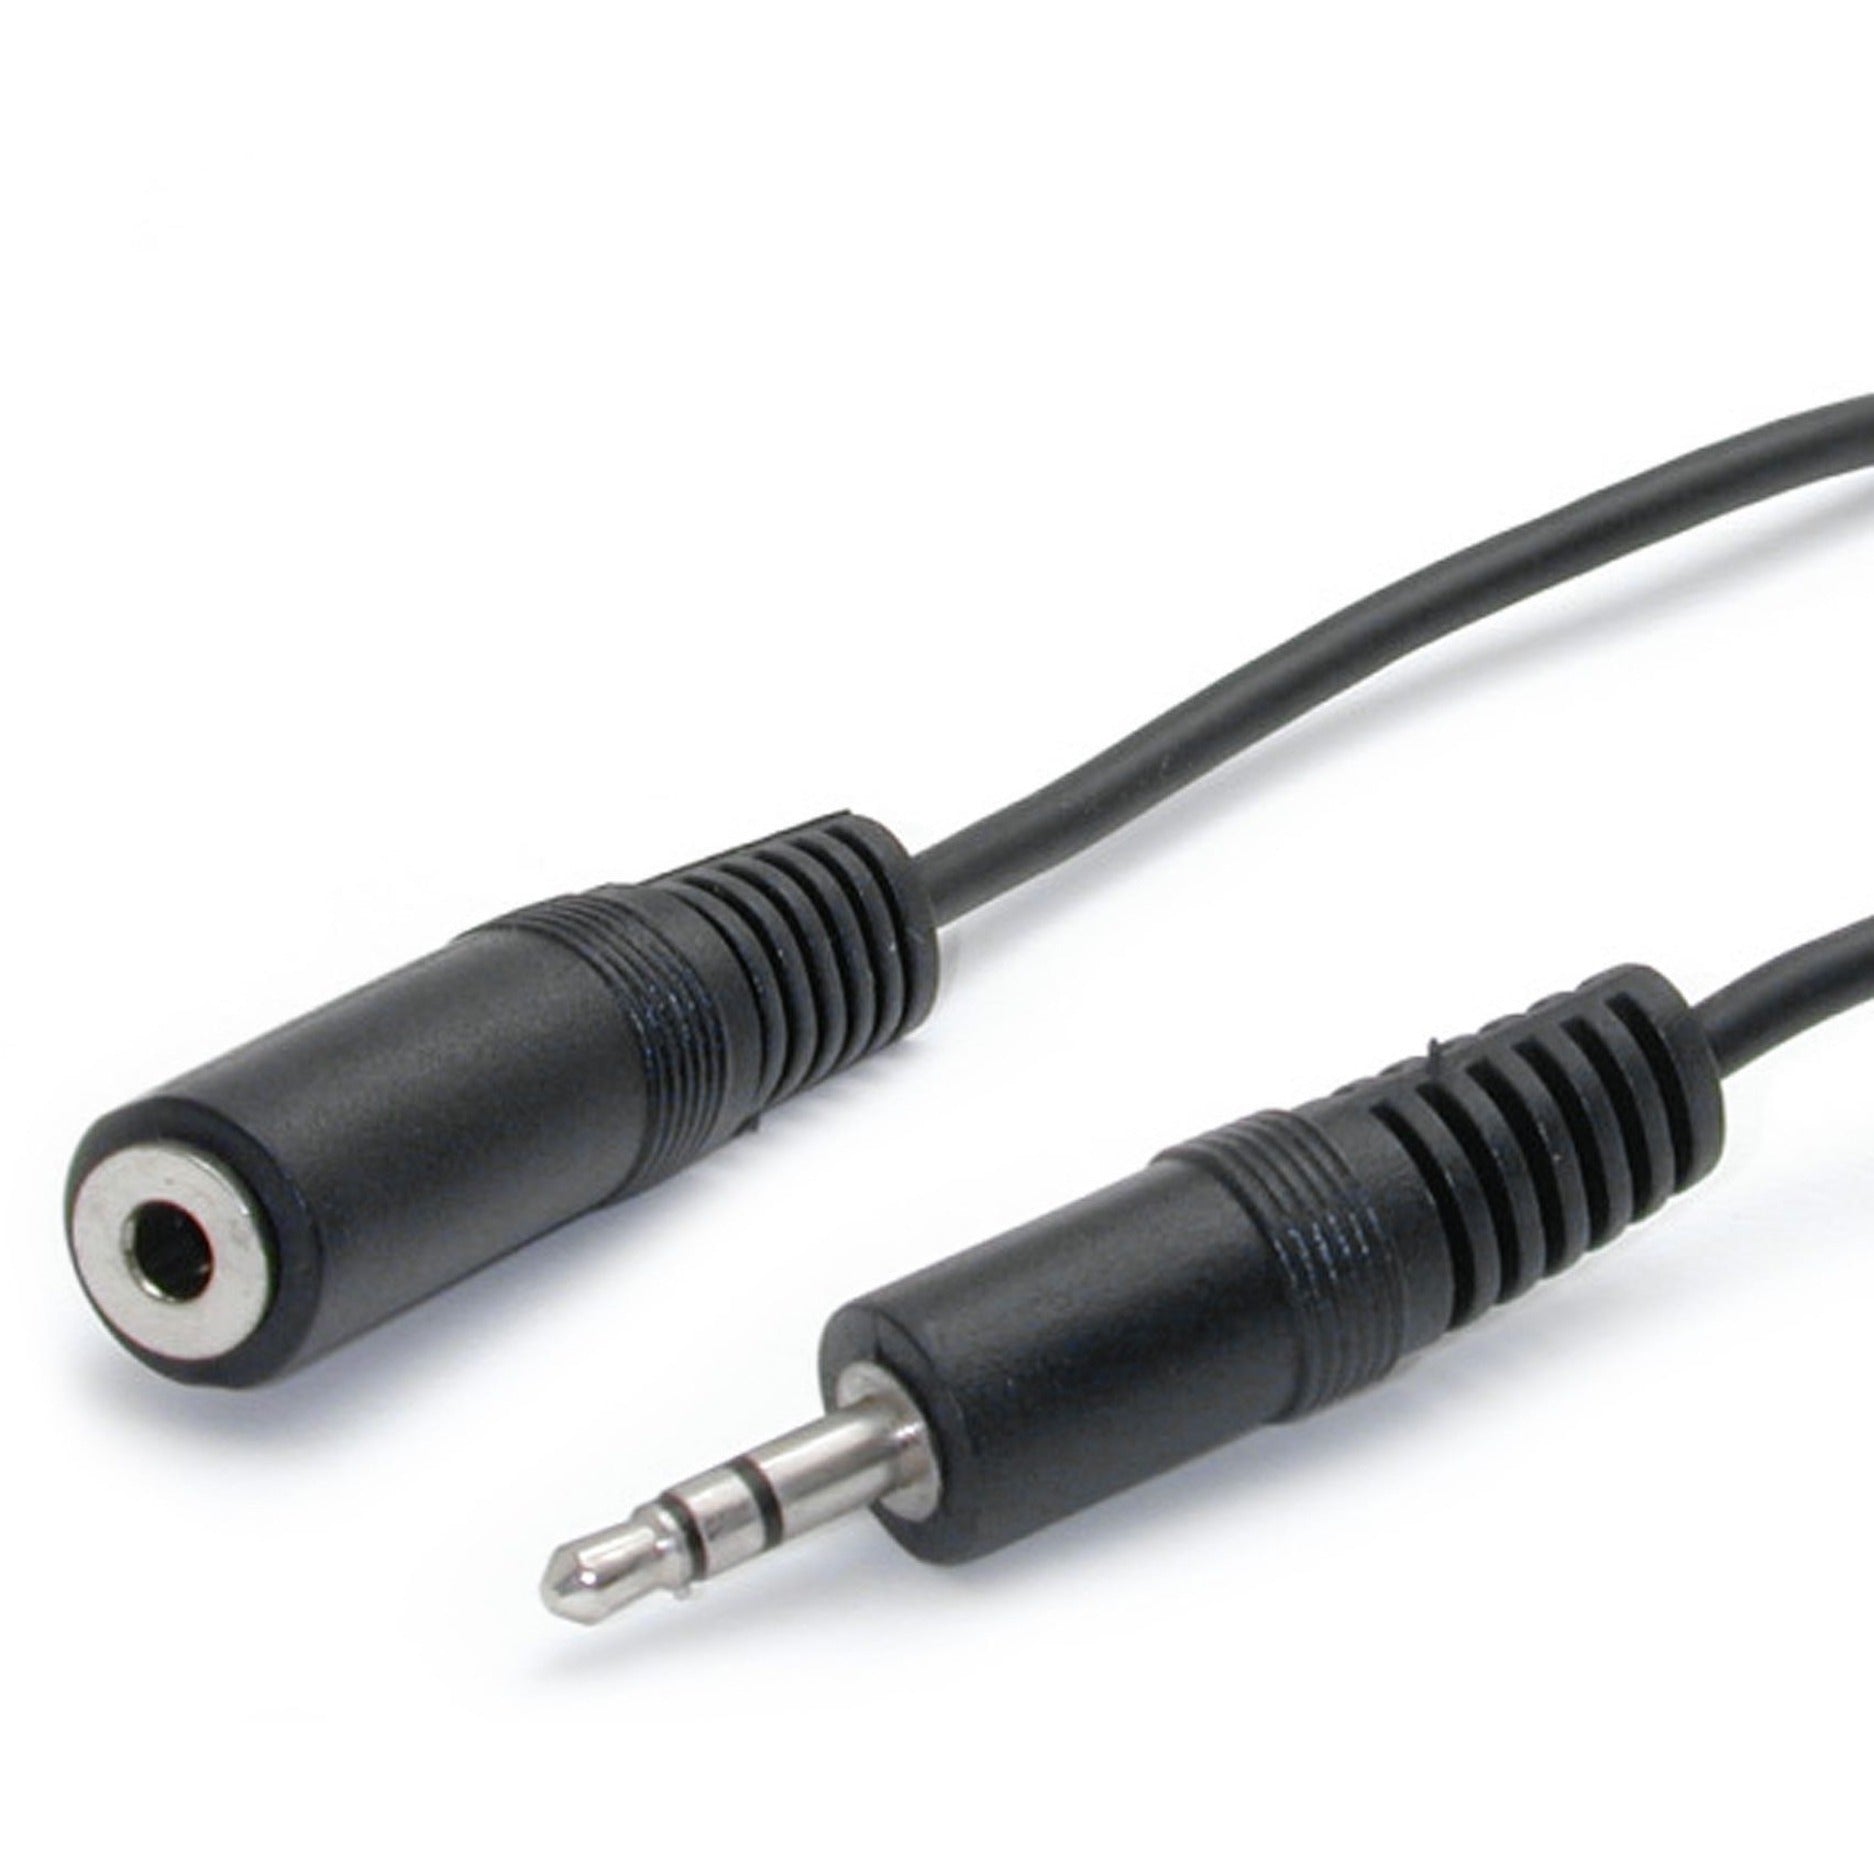 StarTech.com MU6MF 6 ft 3.5mm Stereo Extension Audio Cable, Extend Your PC Speaker Cable